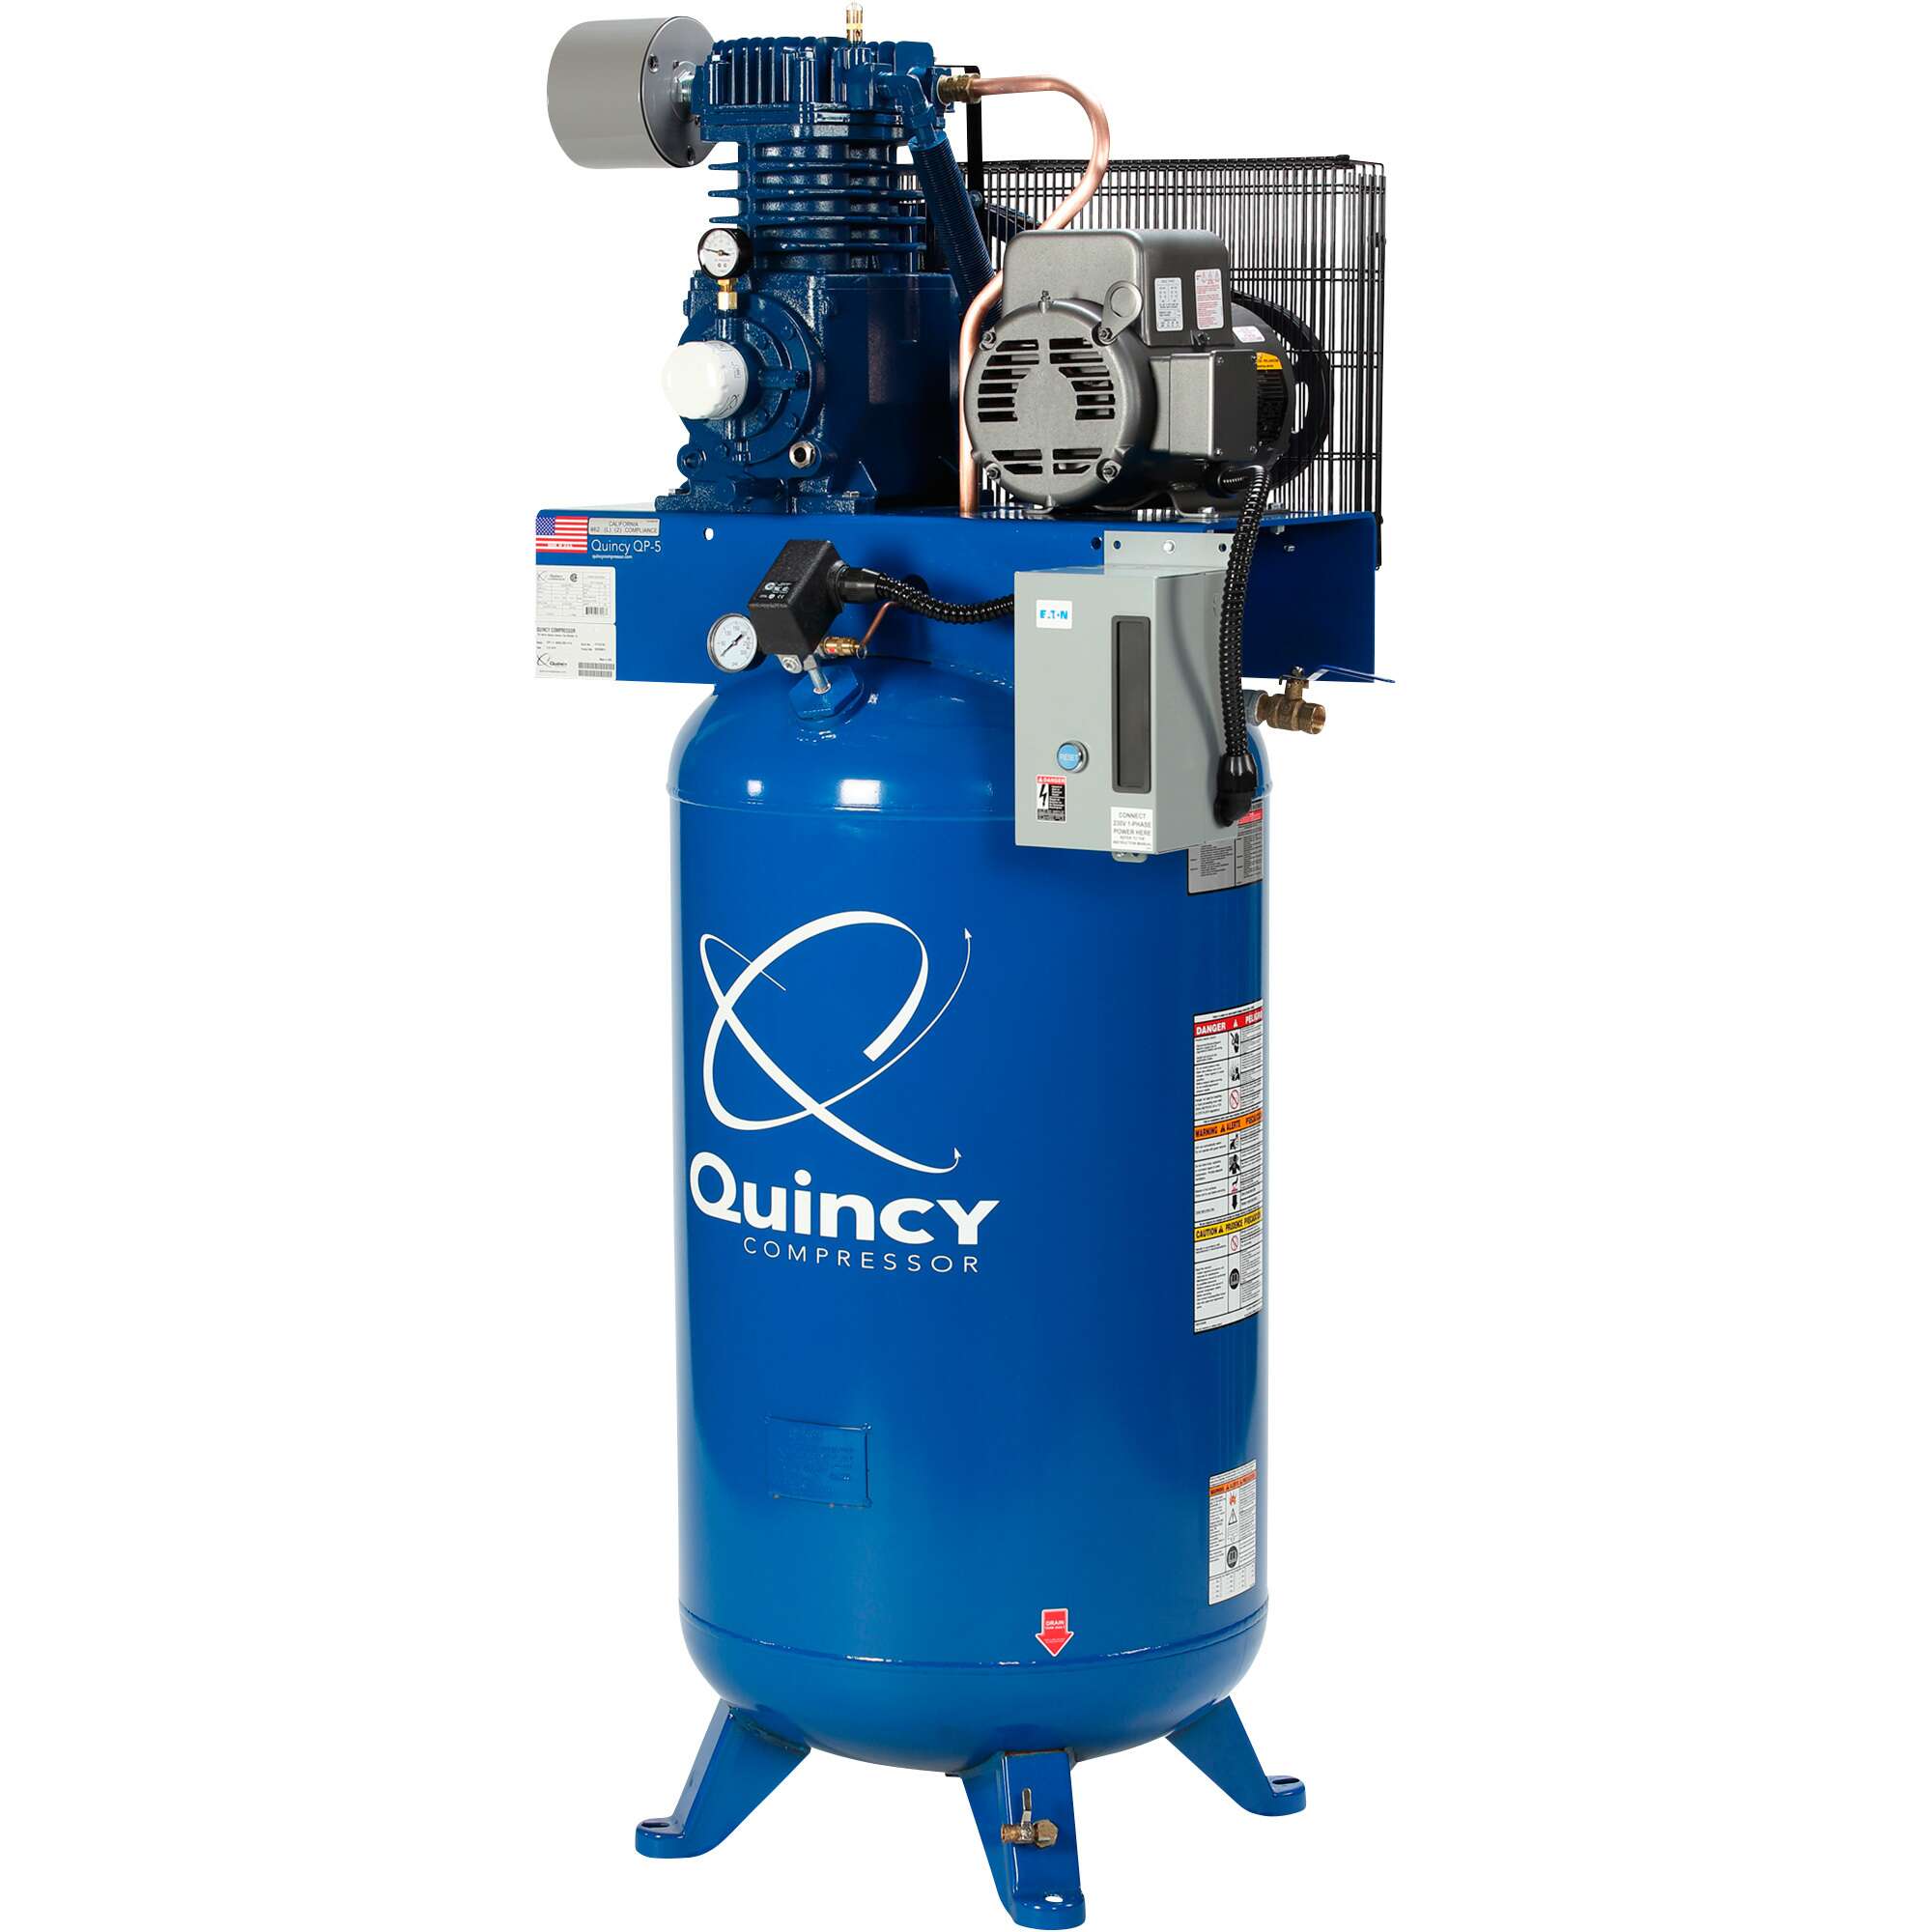 Quincy QP5 Pressure Lubricated Reciprocating Air Compressor 5 HP 460 Volt 3 Phase 80 Gallon Vertical